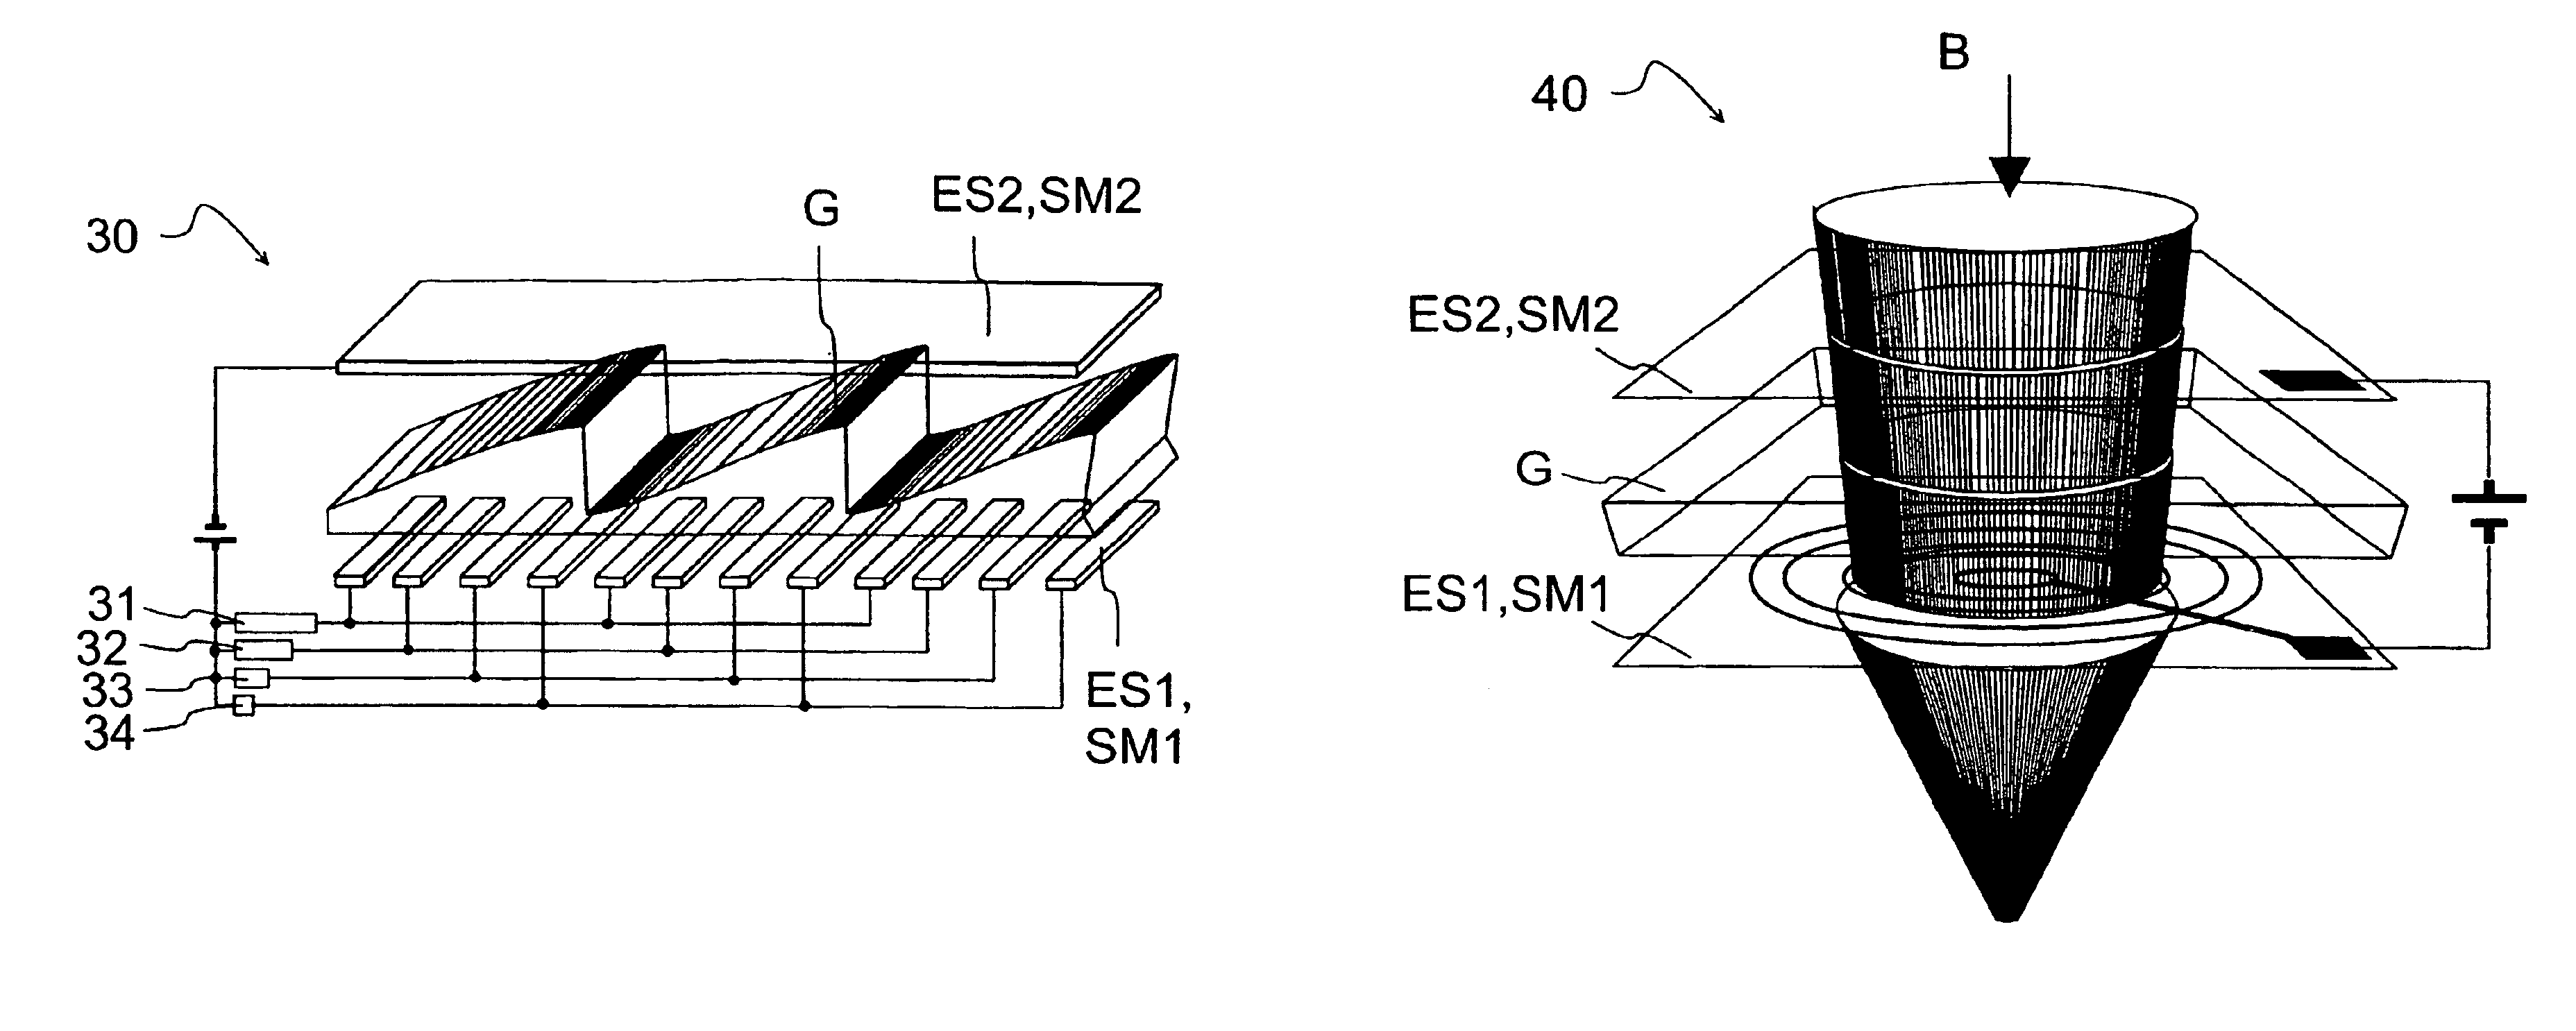 Electrically reconfigurable optical devices